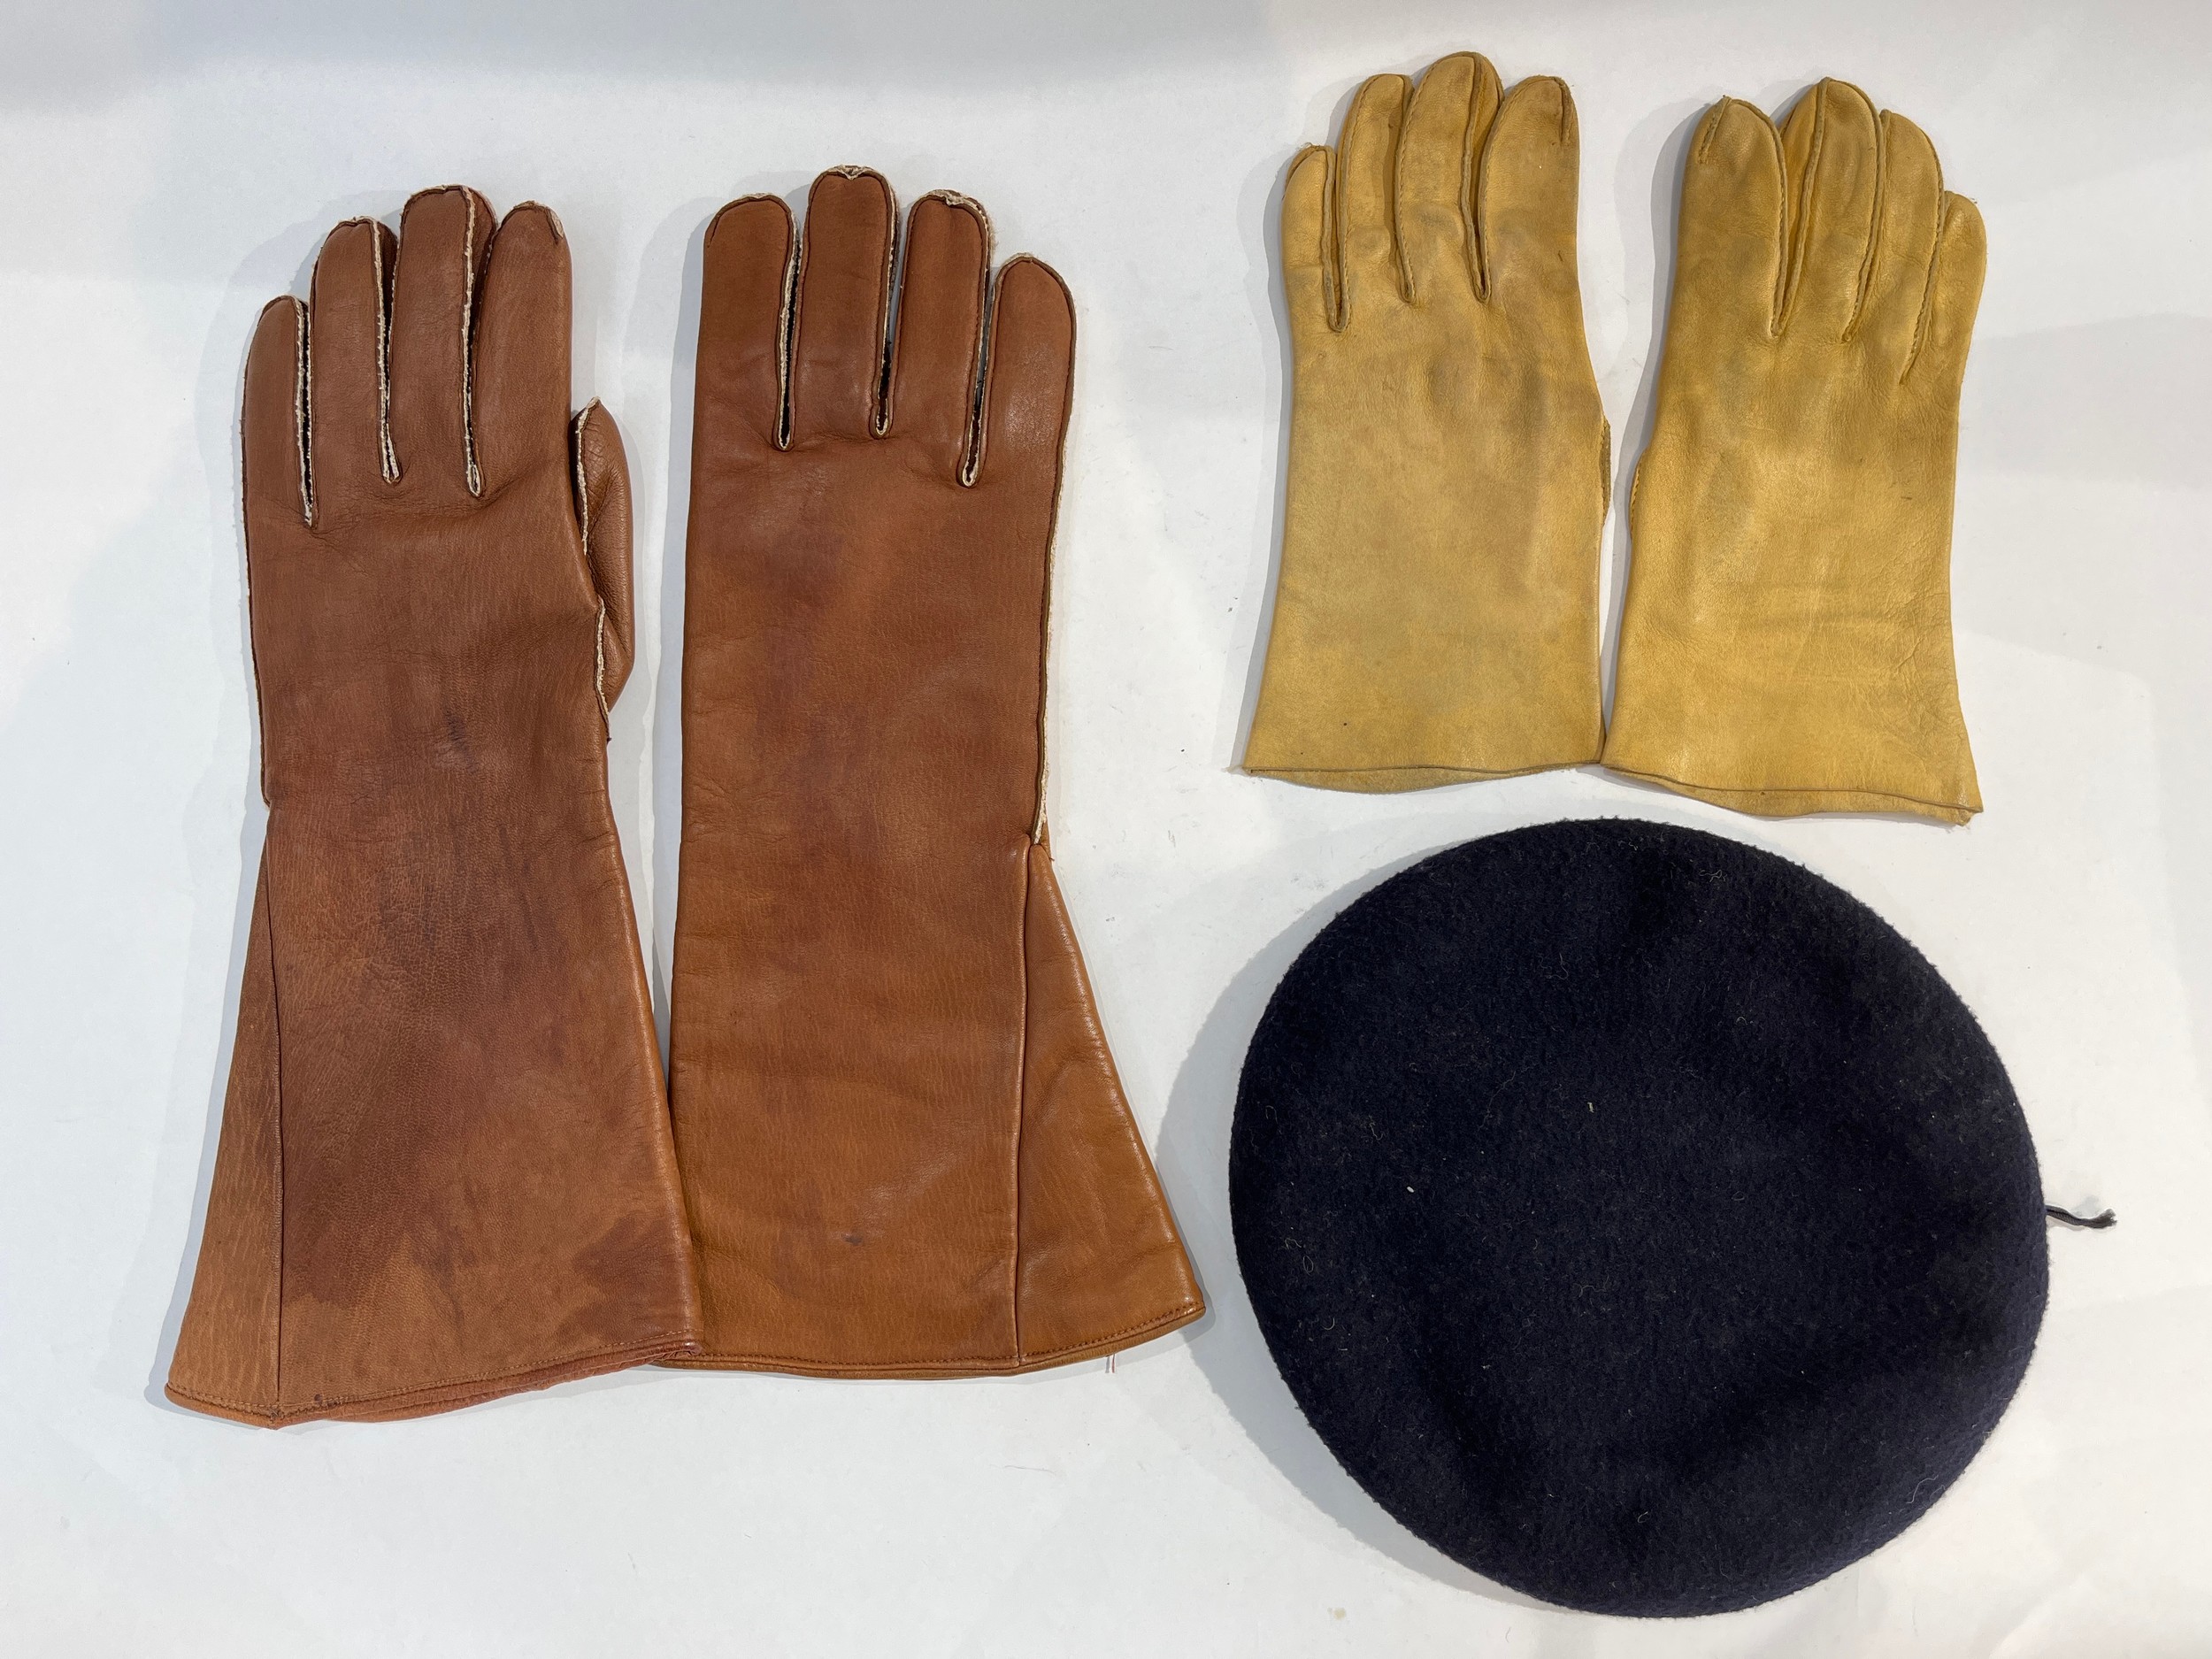 A Scott & Co. beret (black) together with a pair of gauntlets and a pair of leather gloves. From the